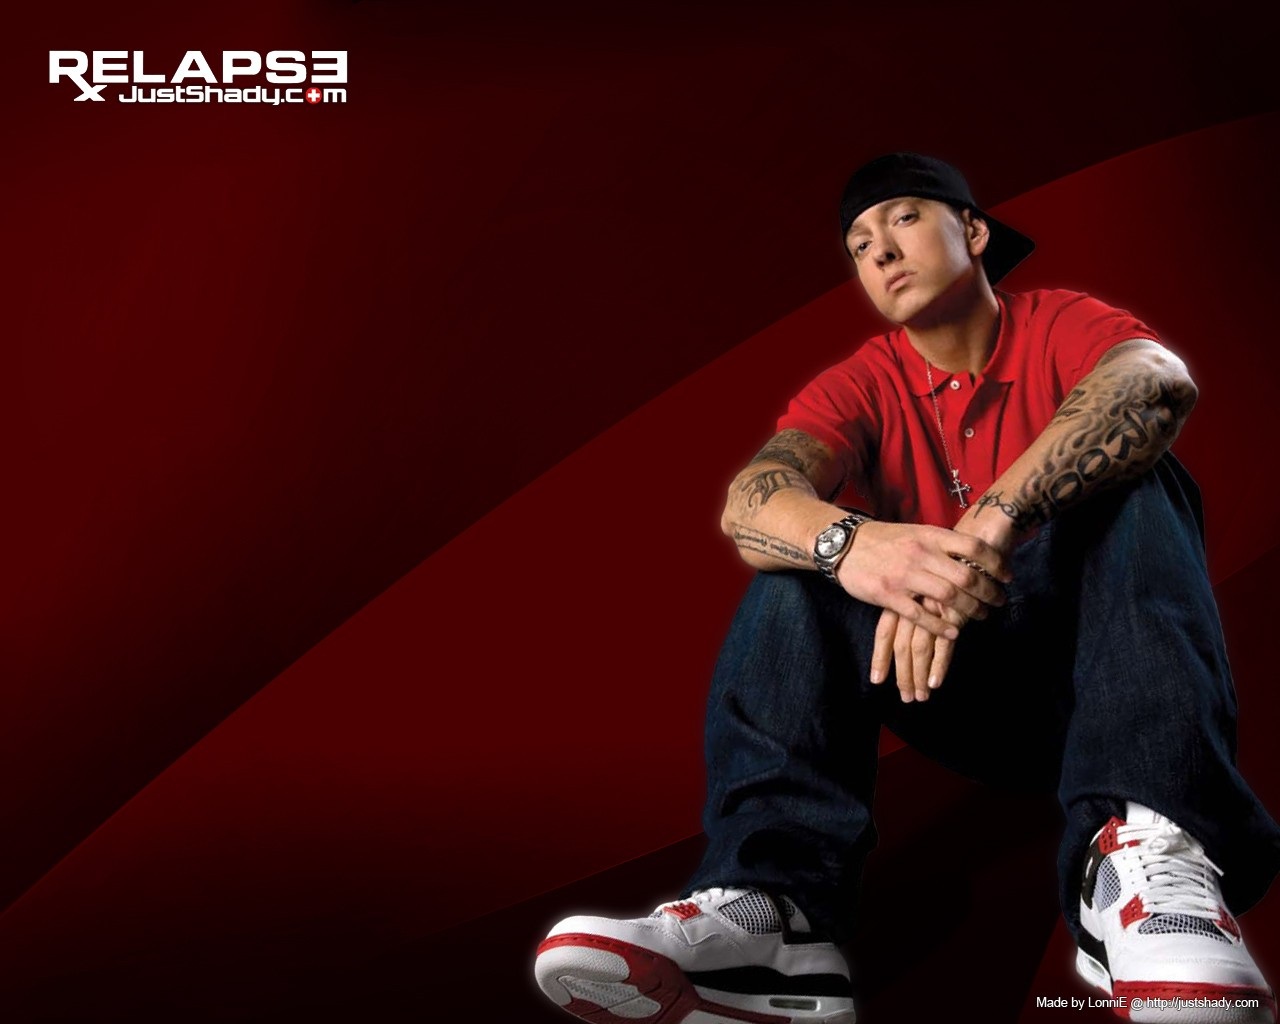 Free Download Hd Eminem Relapse Wallpapers And Photos Hd Music Wallpapers 1280x1024 For Your Desktop Mobile Tablet Explore 22 Eminem Relapse Wallpaper Eminem Relapse Wallpaper Eminem Wallpapers Eminem Wallpapers Hd